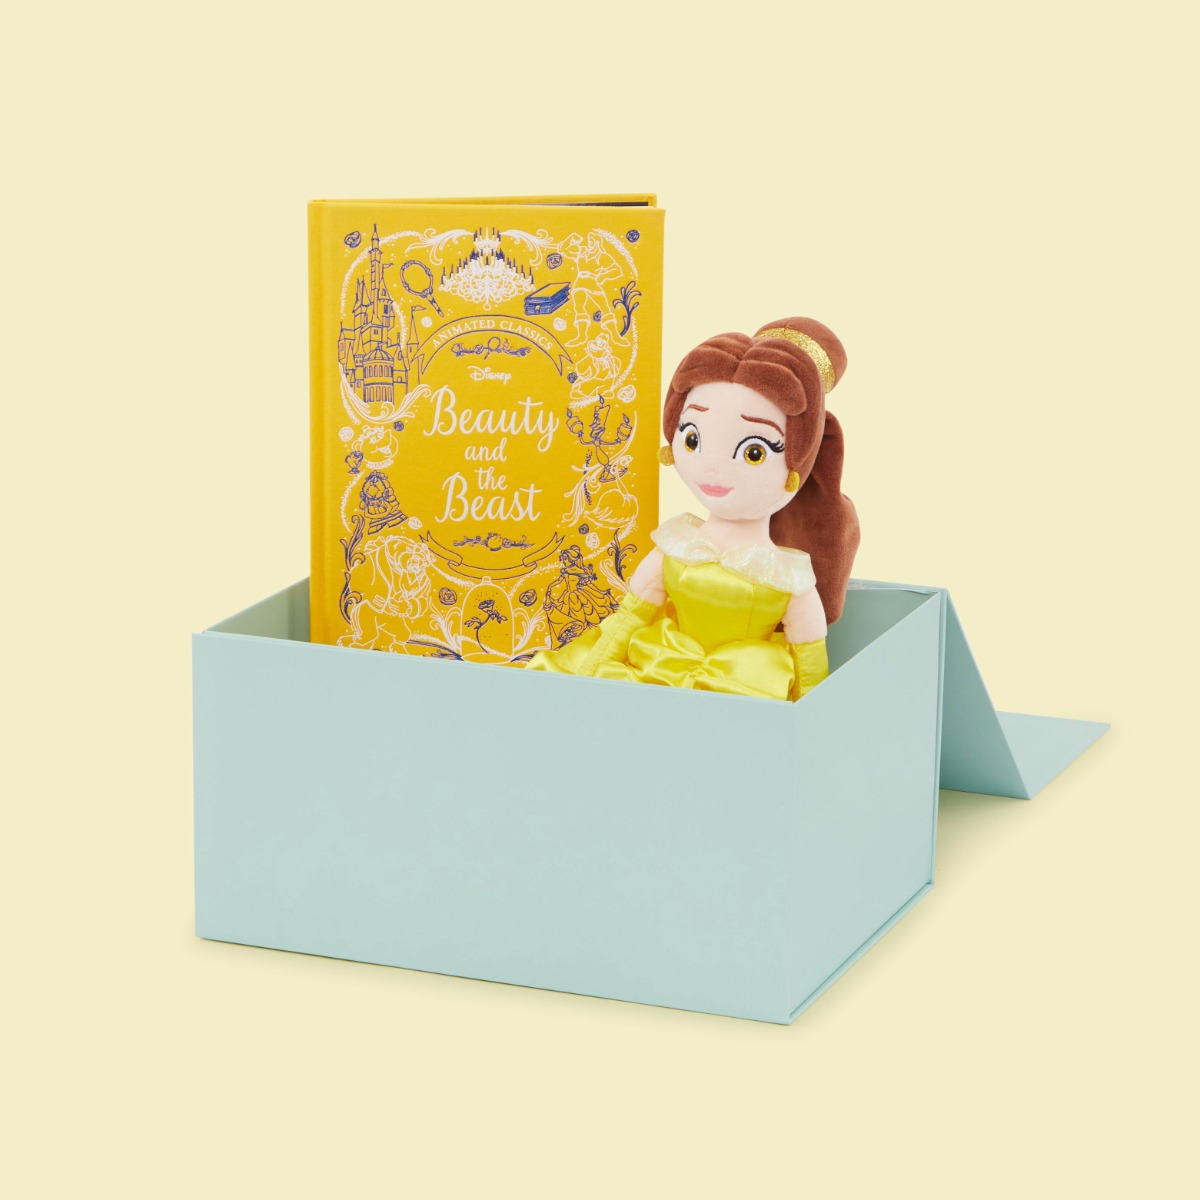 Disney’s Beauty and The Beast Bedtime Story Gift Set